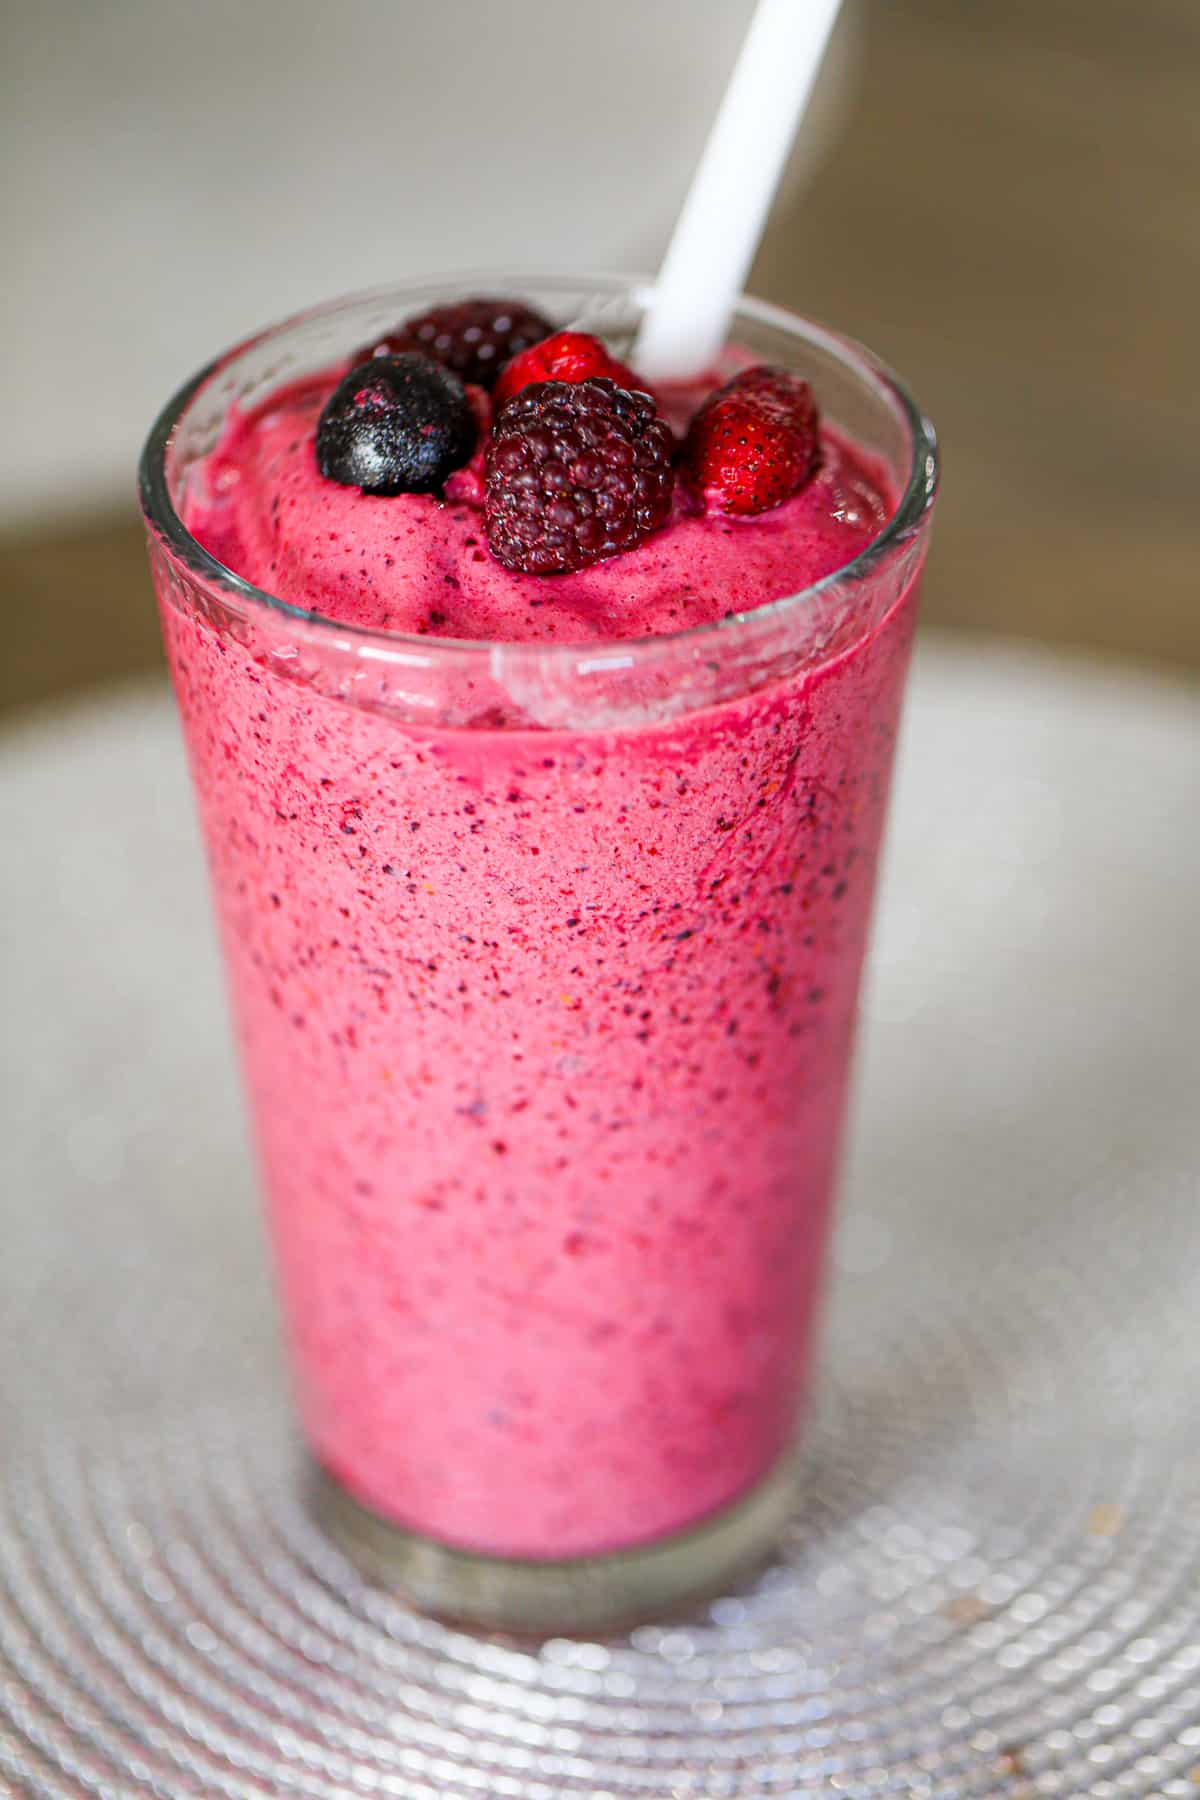 Healthy Berry Protein Smoothie ready to drink!